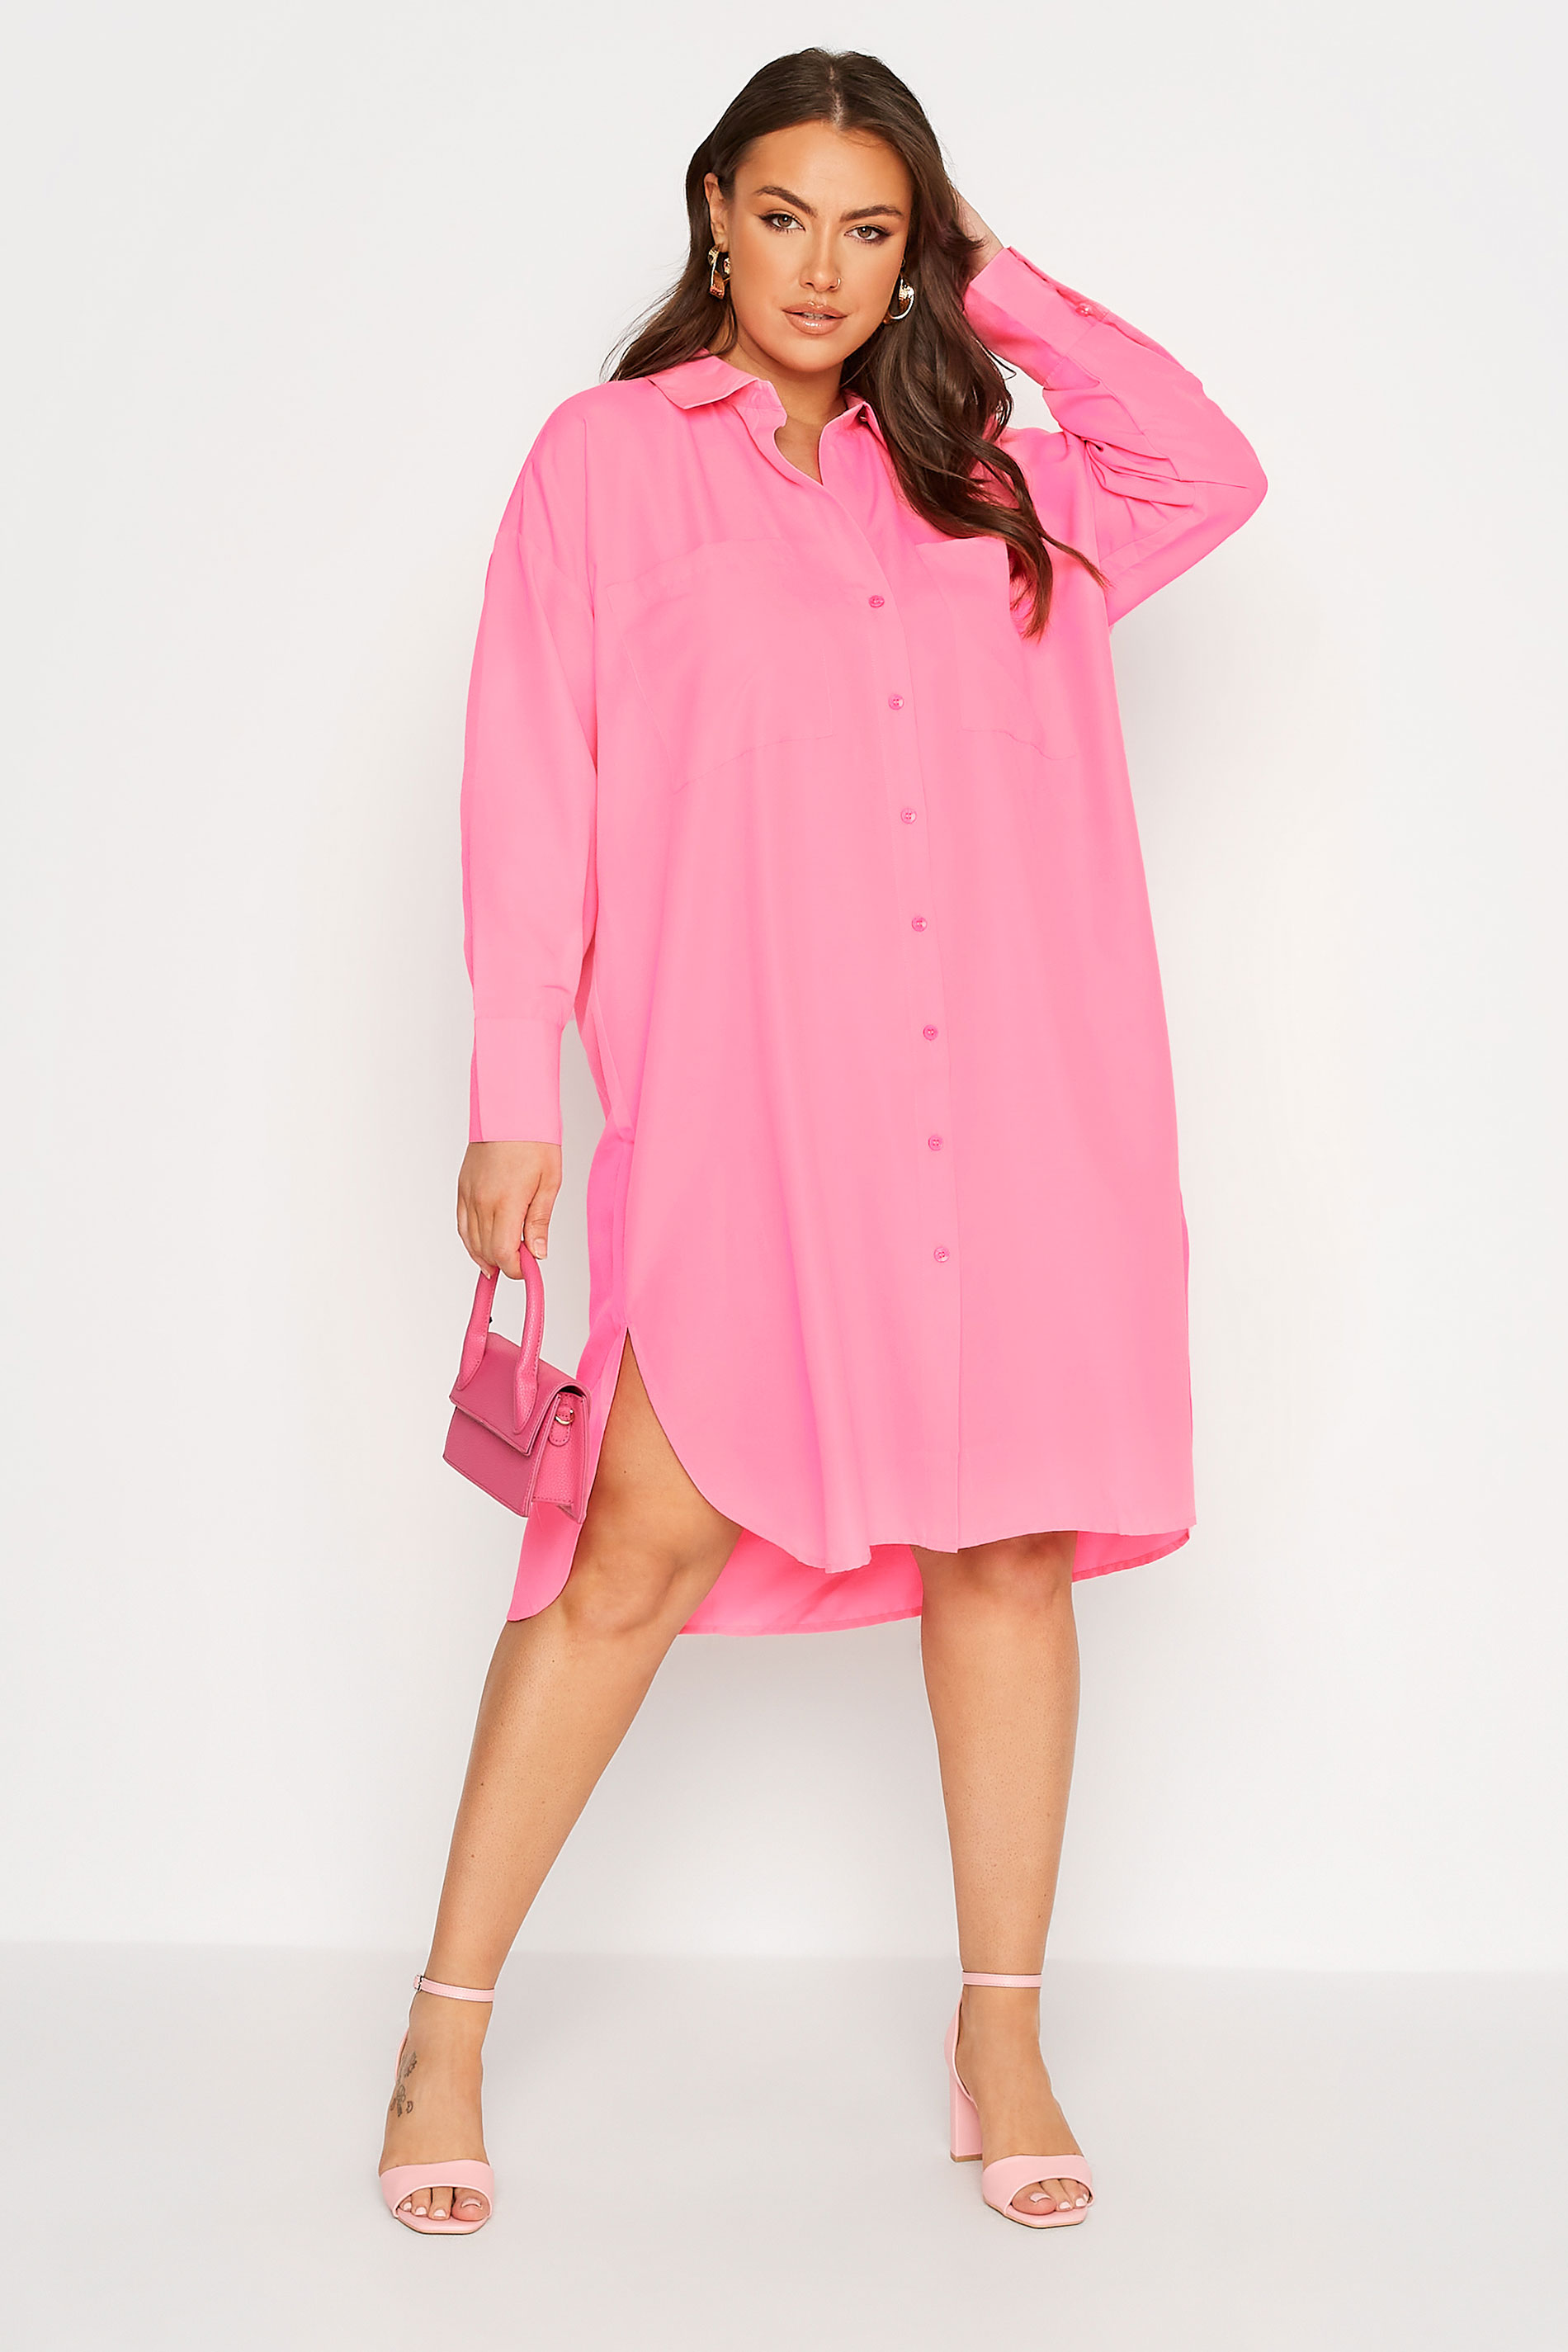 LIMITED COLLECTION Curve Neon Pink Midi Shirt Dress 1